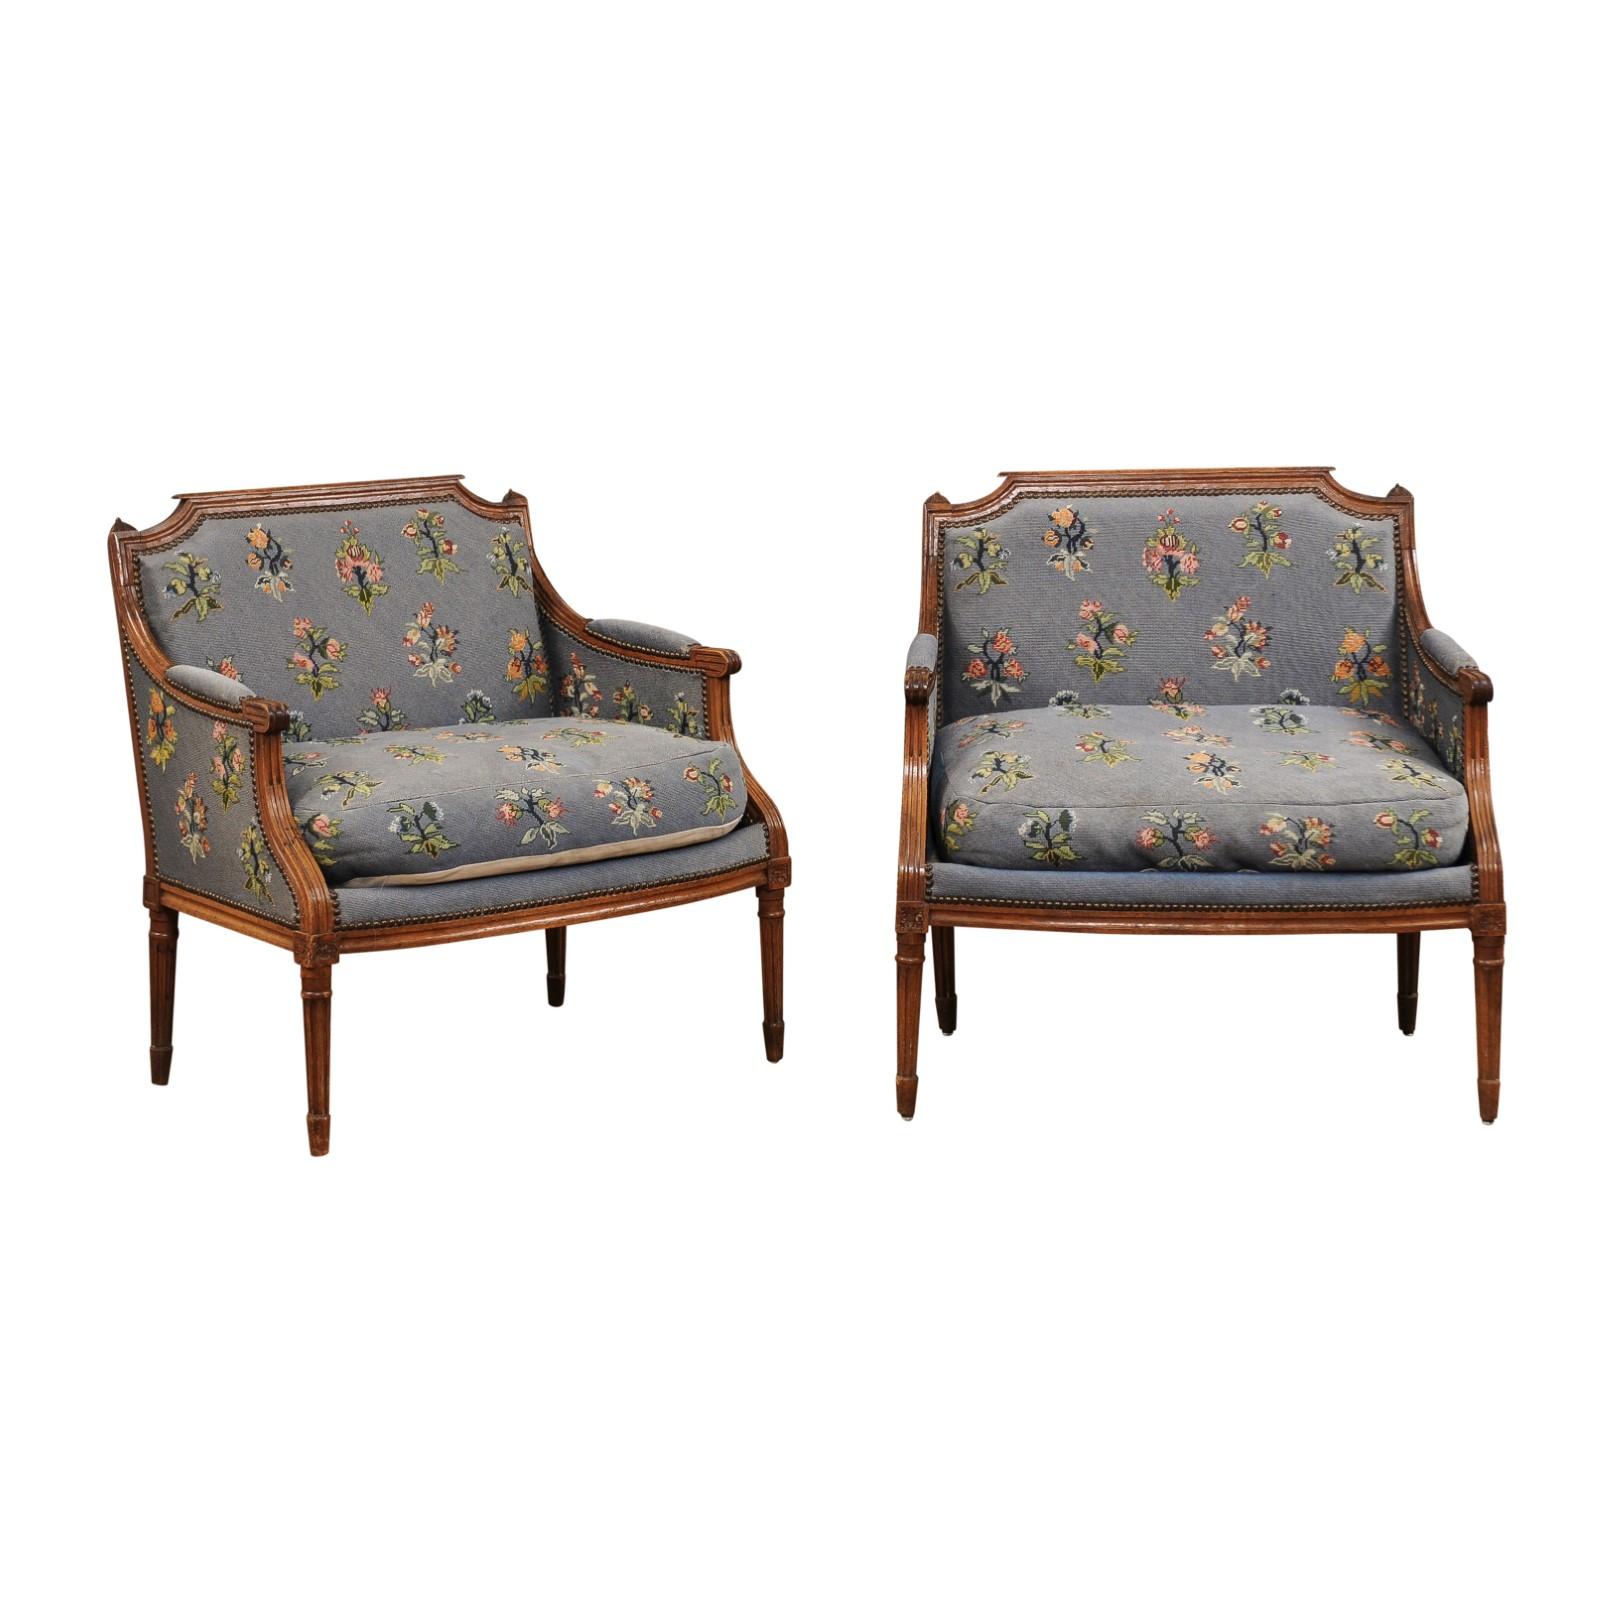 A pair of French Louis XVI period bergères marquises chairs from the late 18th century, with wide seats, carved rosettes, fluted legs and floral upholstery. Created in France during the last decade of the 18th century which saw the end of the